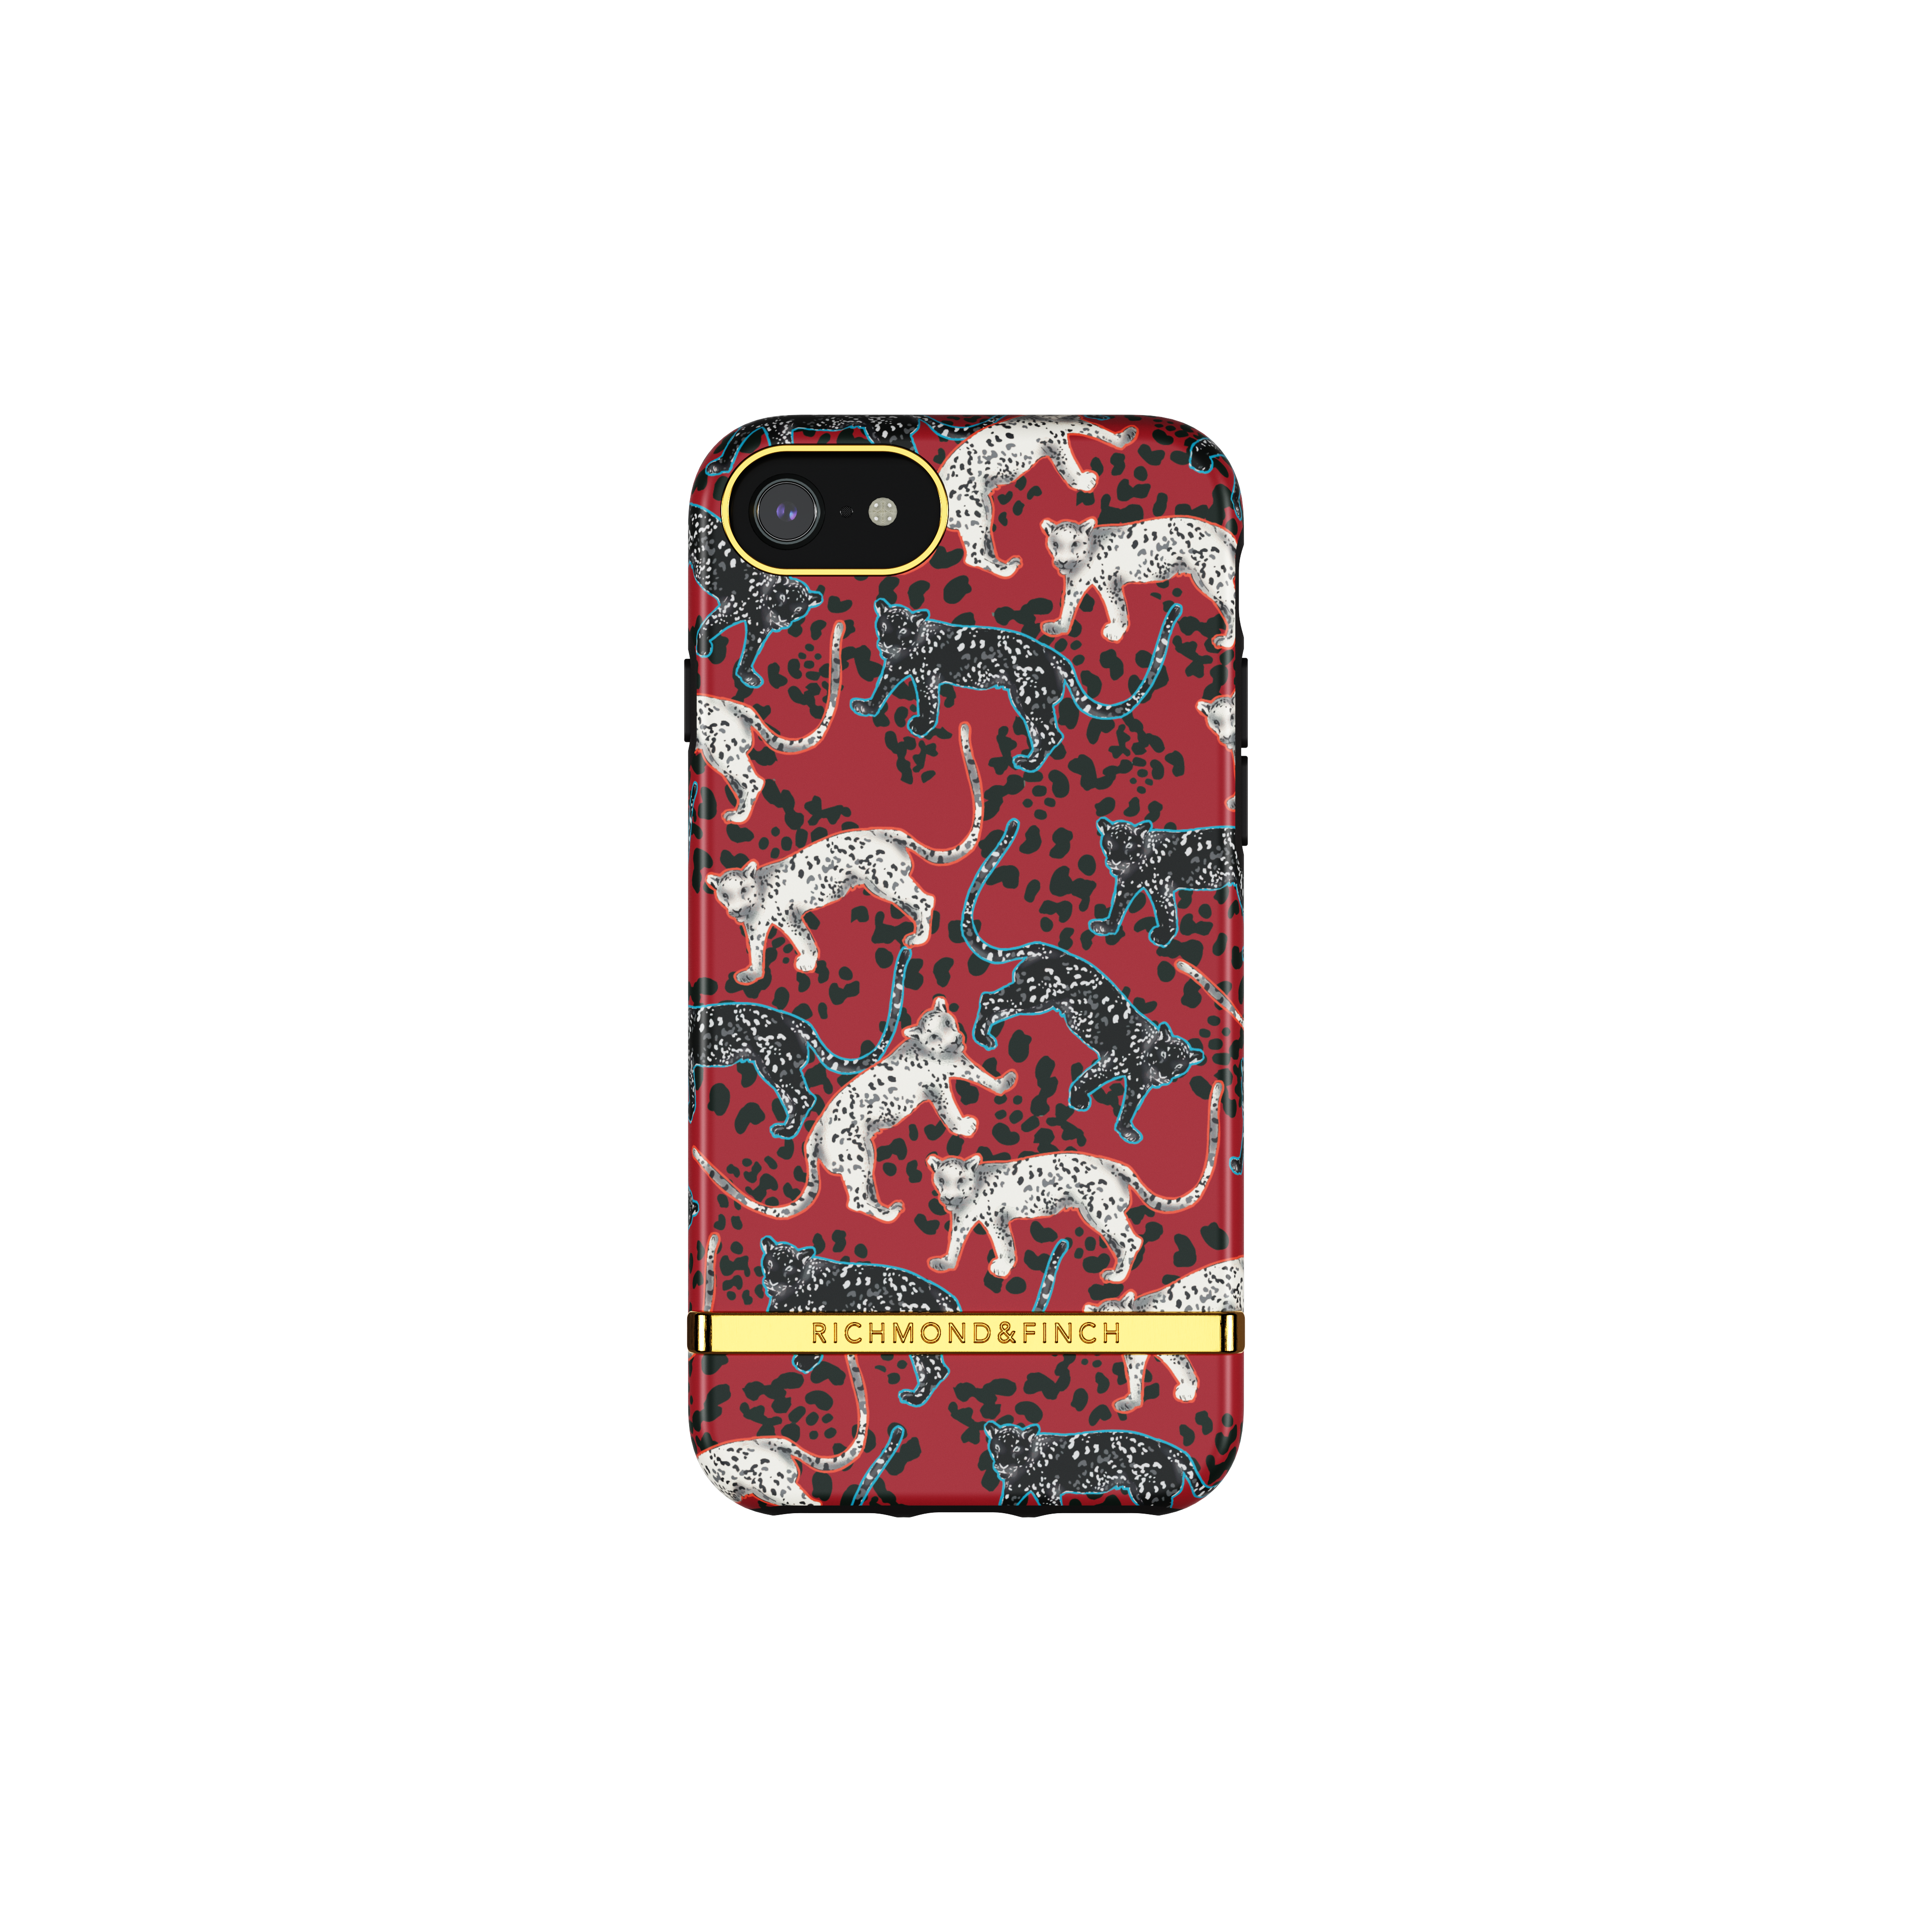 & iPhone APPLE, 6/7/8/SE, RICHMOND Red 6/6S/7/8/SE20/SE22, Leopard IPHONE Backcover, FINCH RED Samba